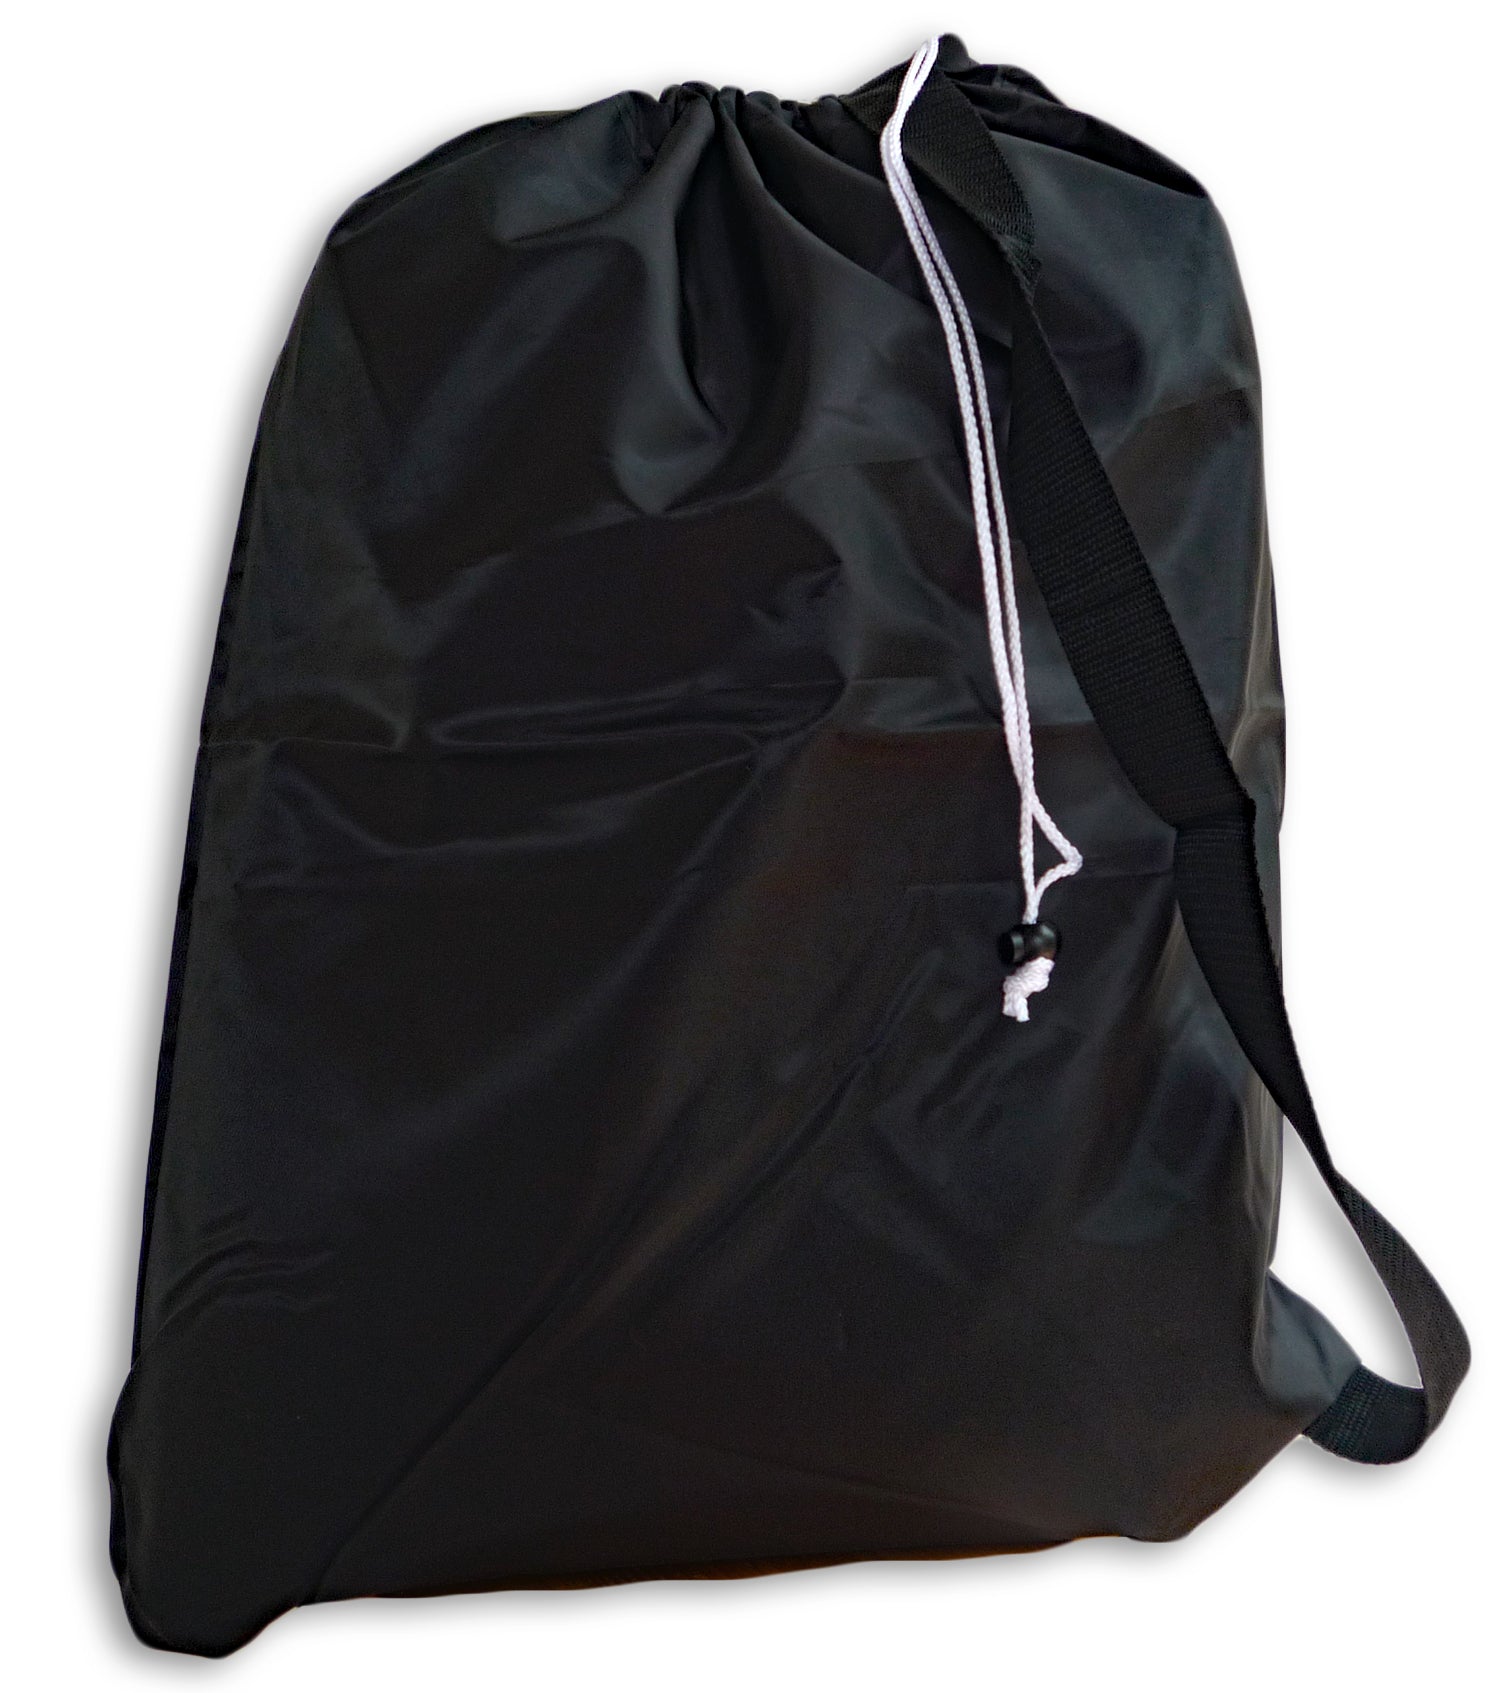 Small Laundry Bags with Carry Straps, Drawstrings, Locking Closures